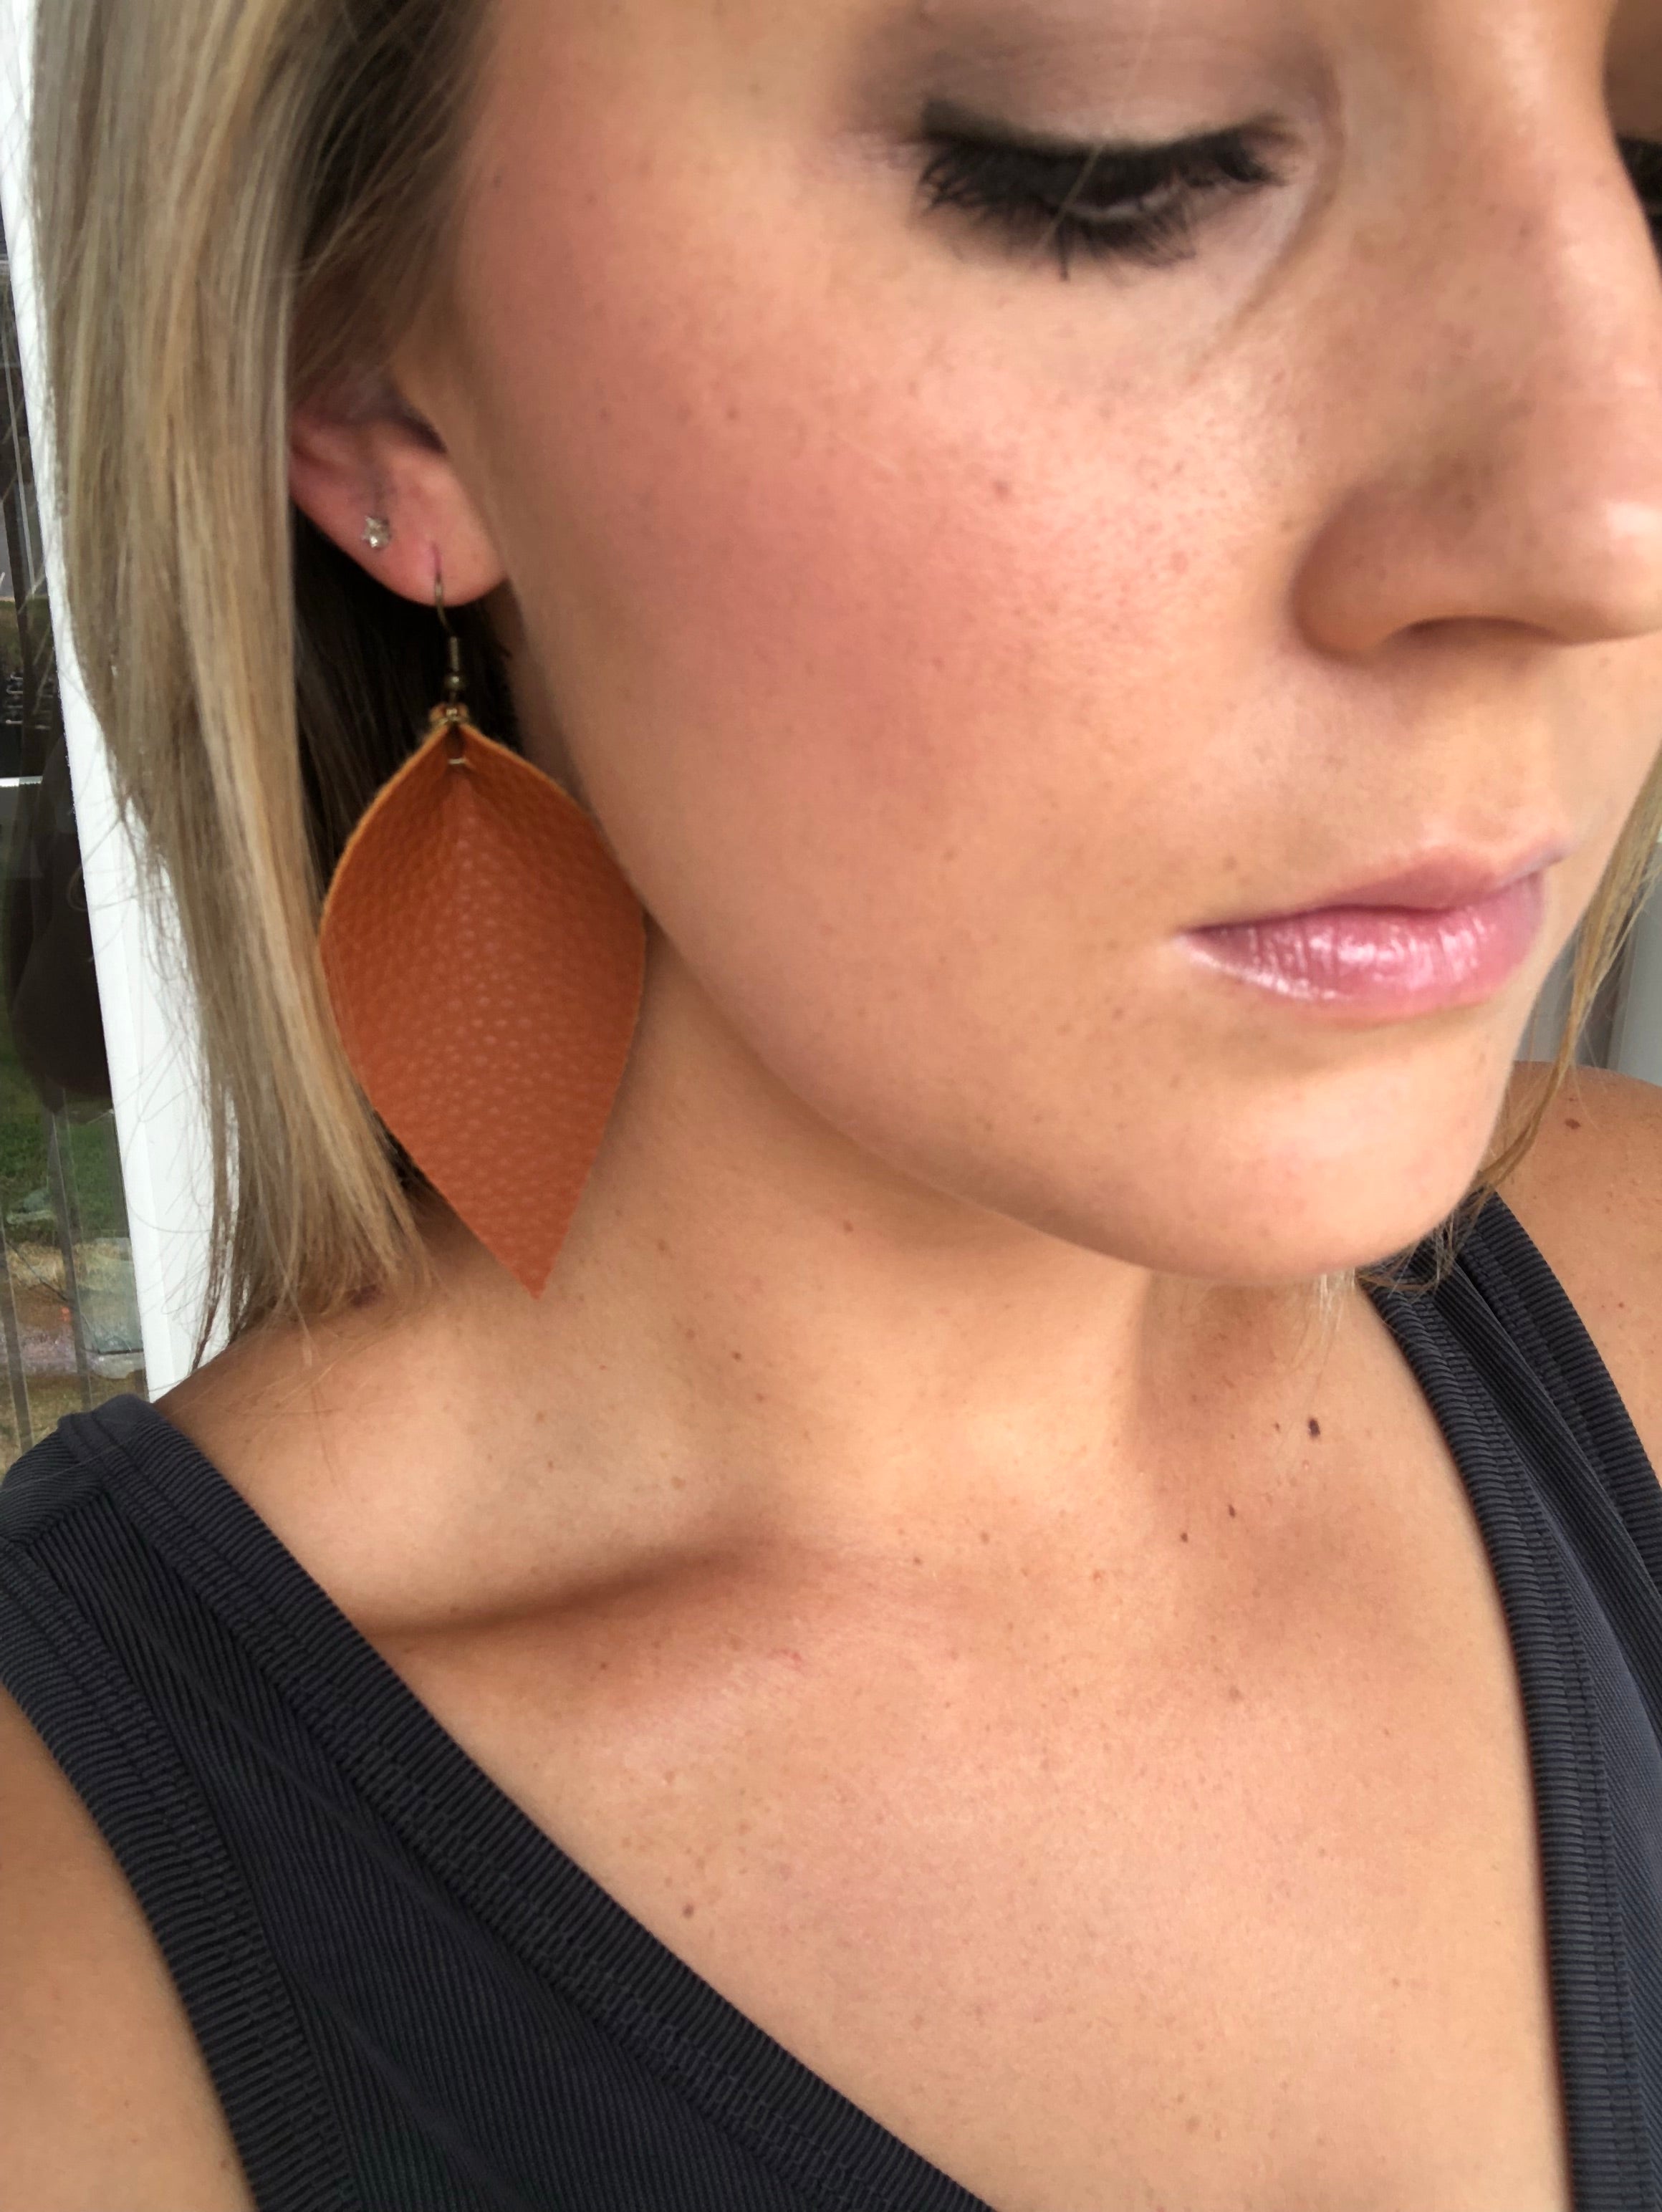 Camel Feather Faux Leather Earring